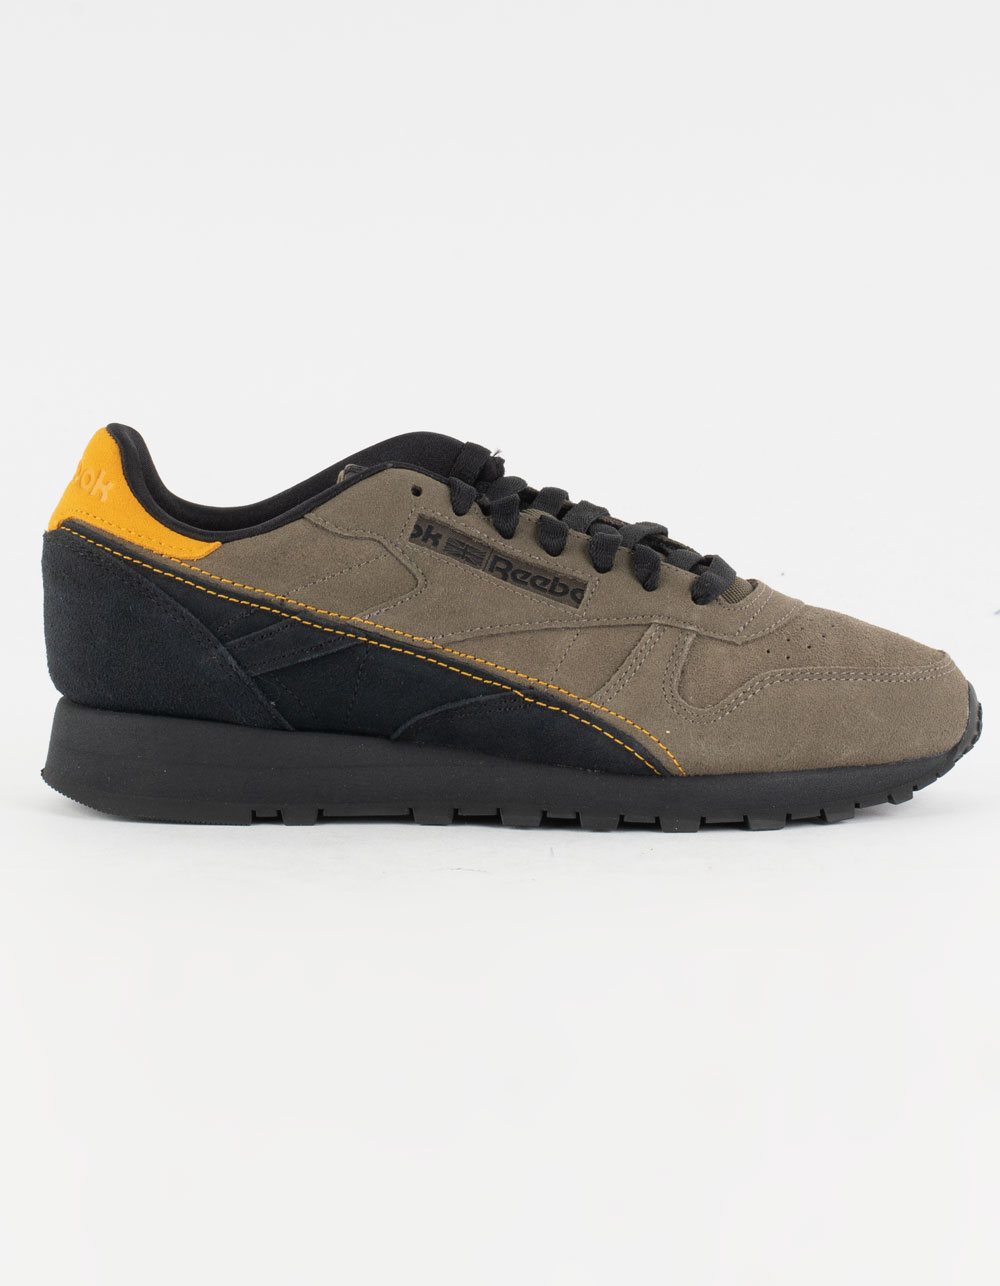 REEBOK Classic Leather Mens - OLIVE | Tillys